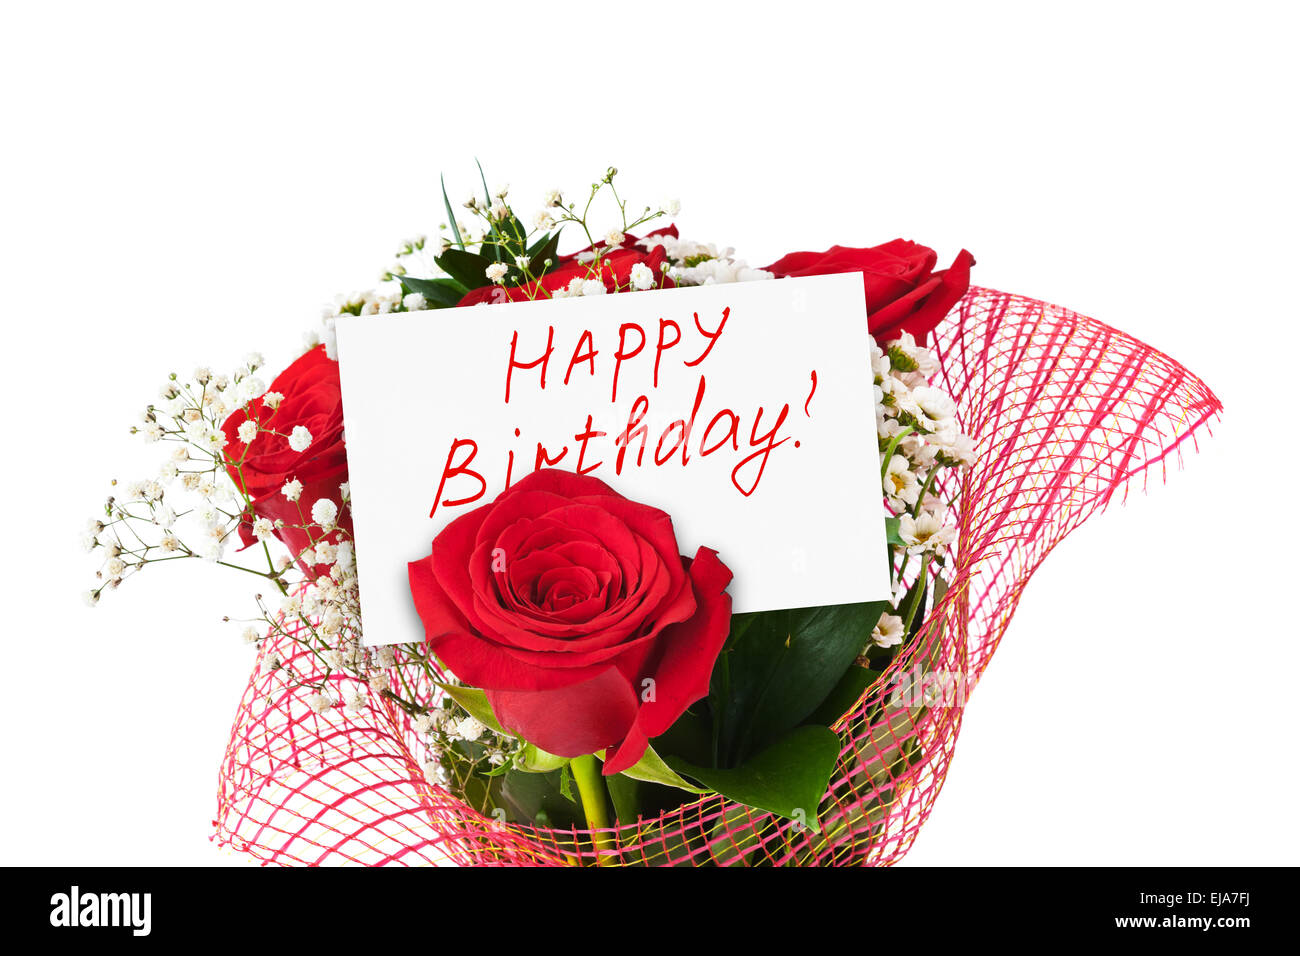 Roses bouquet and card Happy Birthday Stock Photo - Alamy